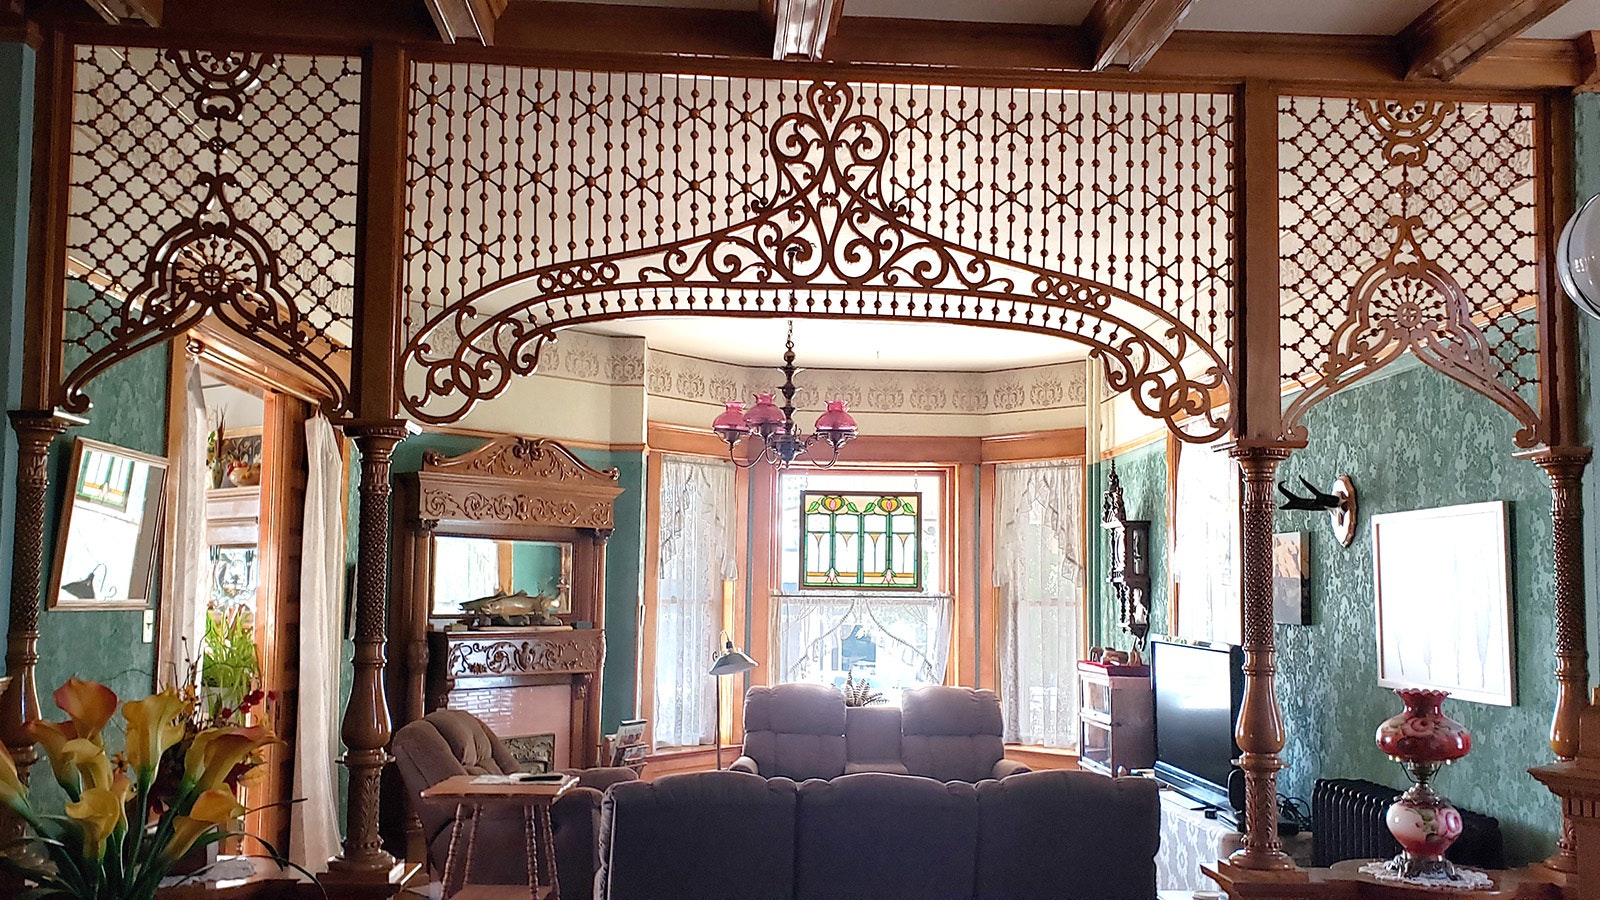 The beautiful fretwork in the Ferris Mansion in Rawlins is original to the home.